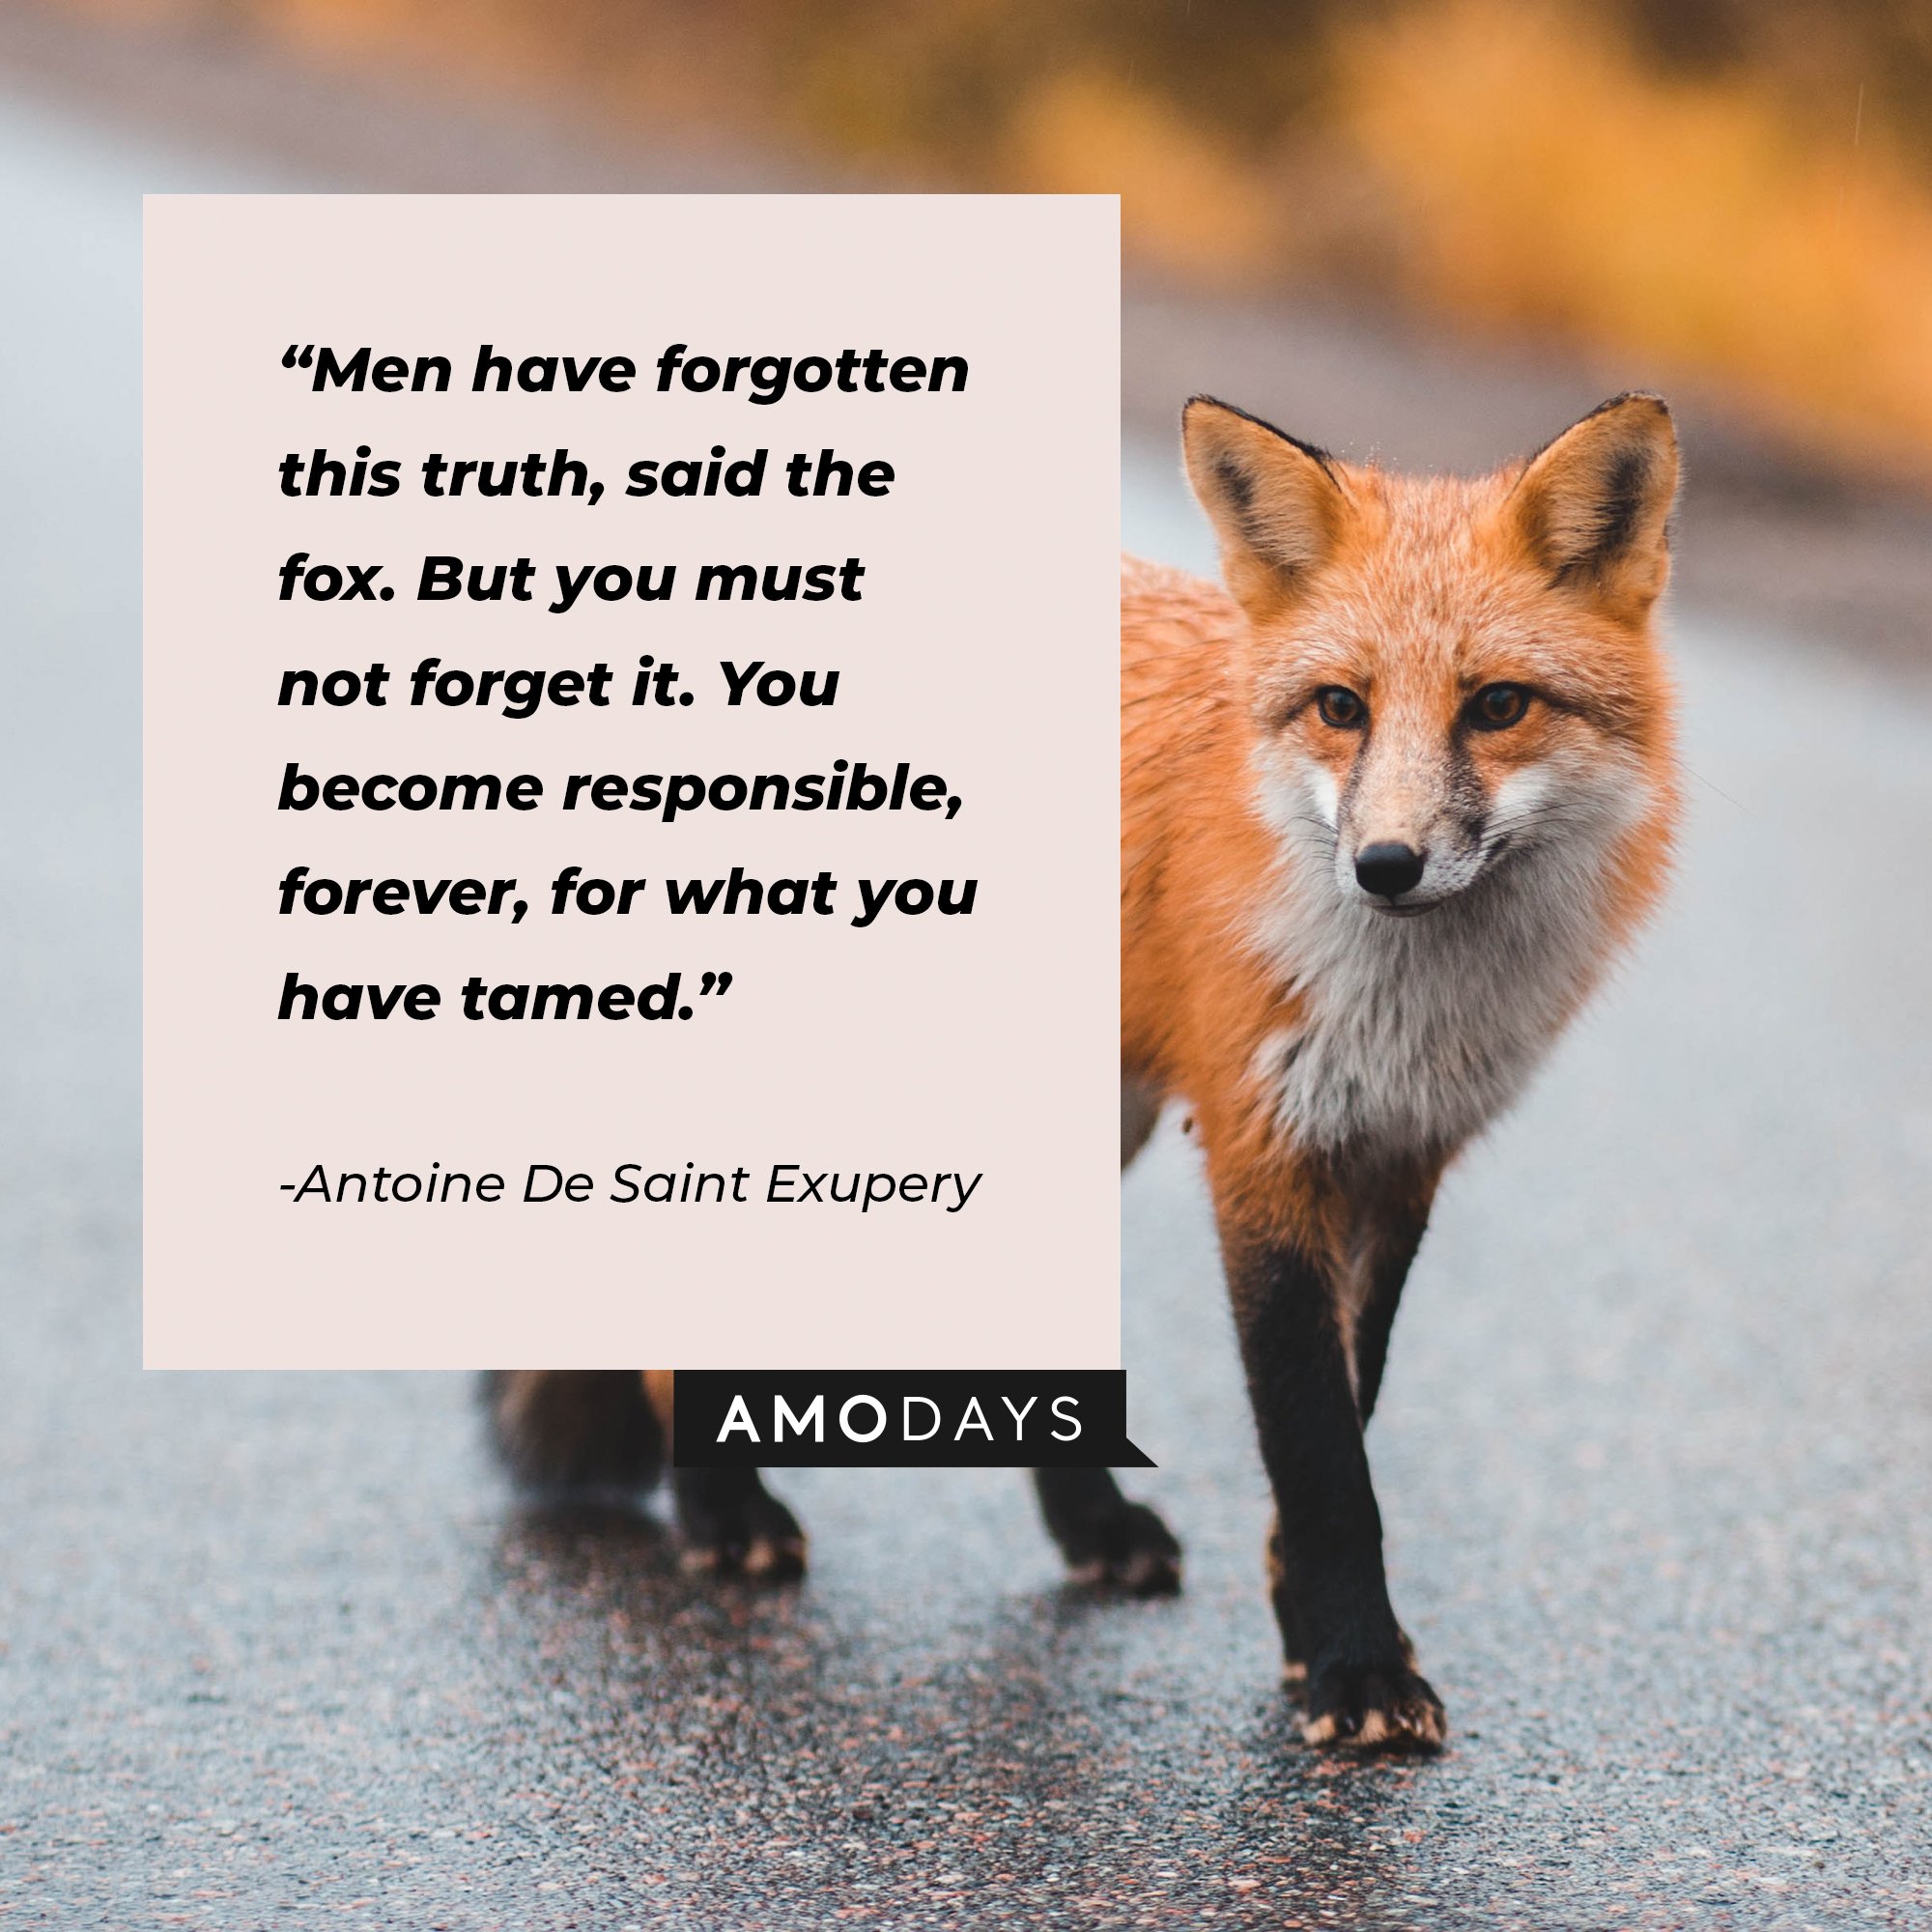 Antoine De Saint Exupery's quote: "Men have forgotten this truth, said the fox. But you must not forget it. You become responsible, forever, for what you have tamed." | Image: AmoDays